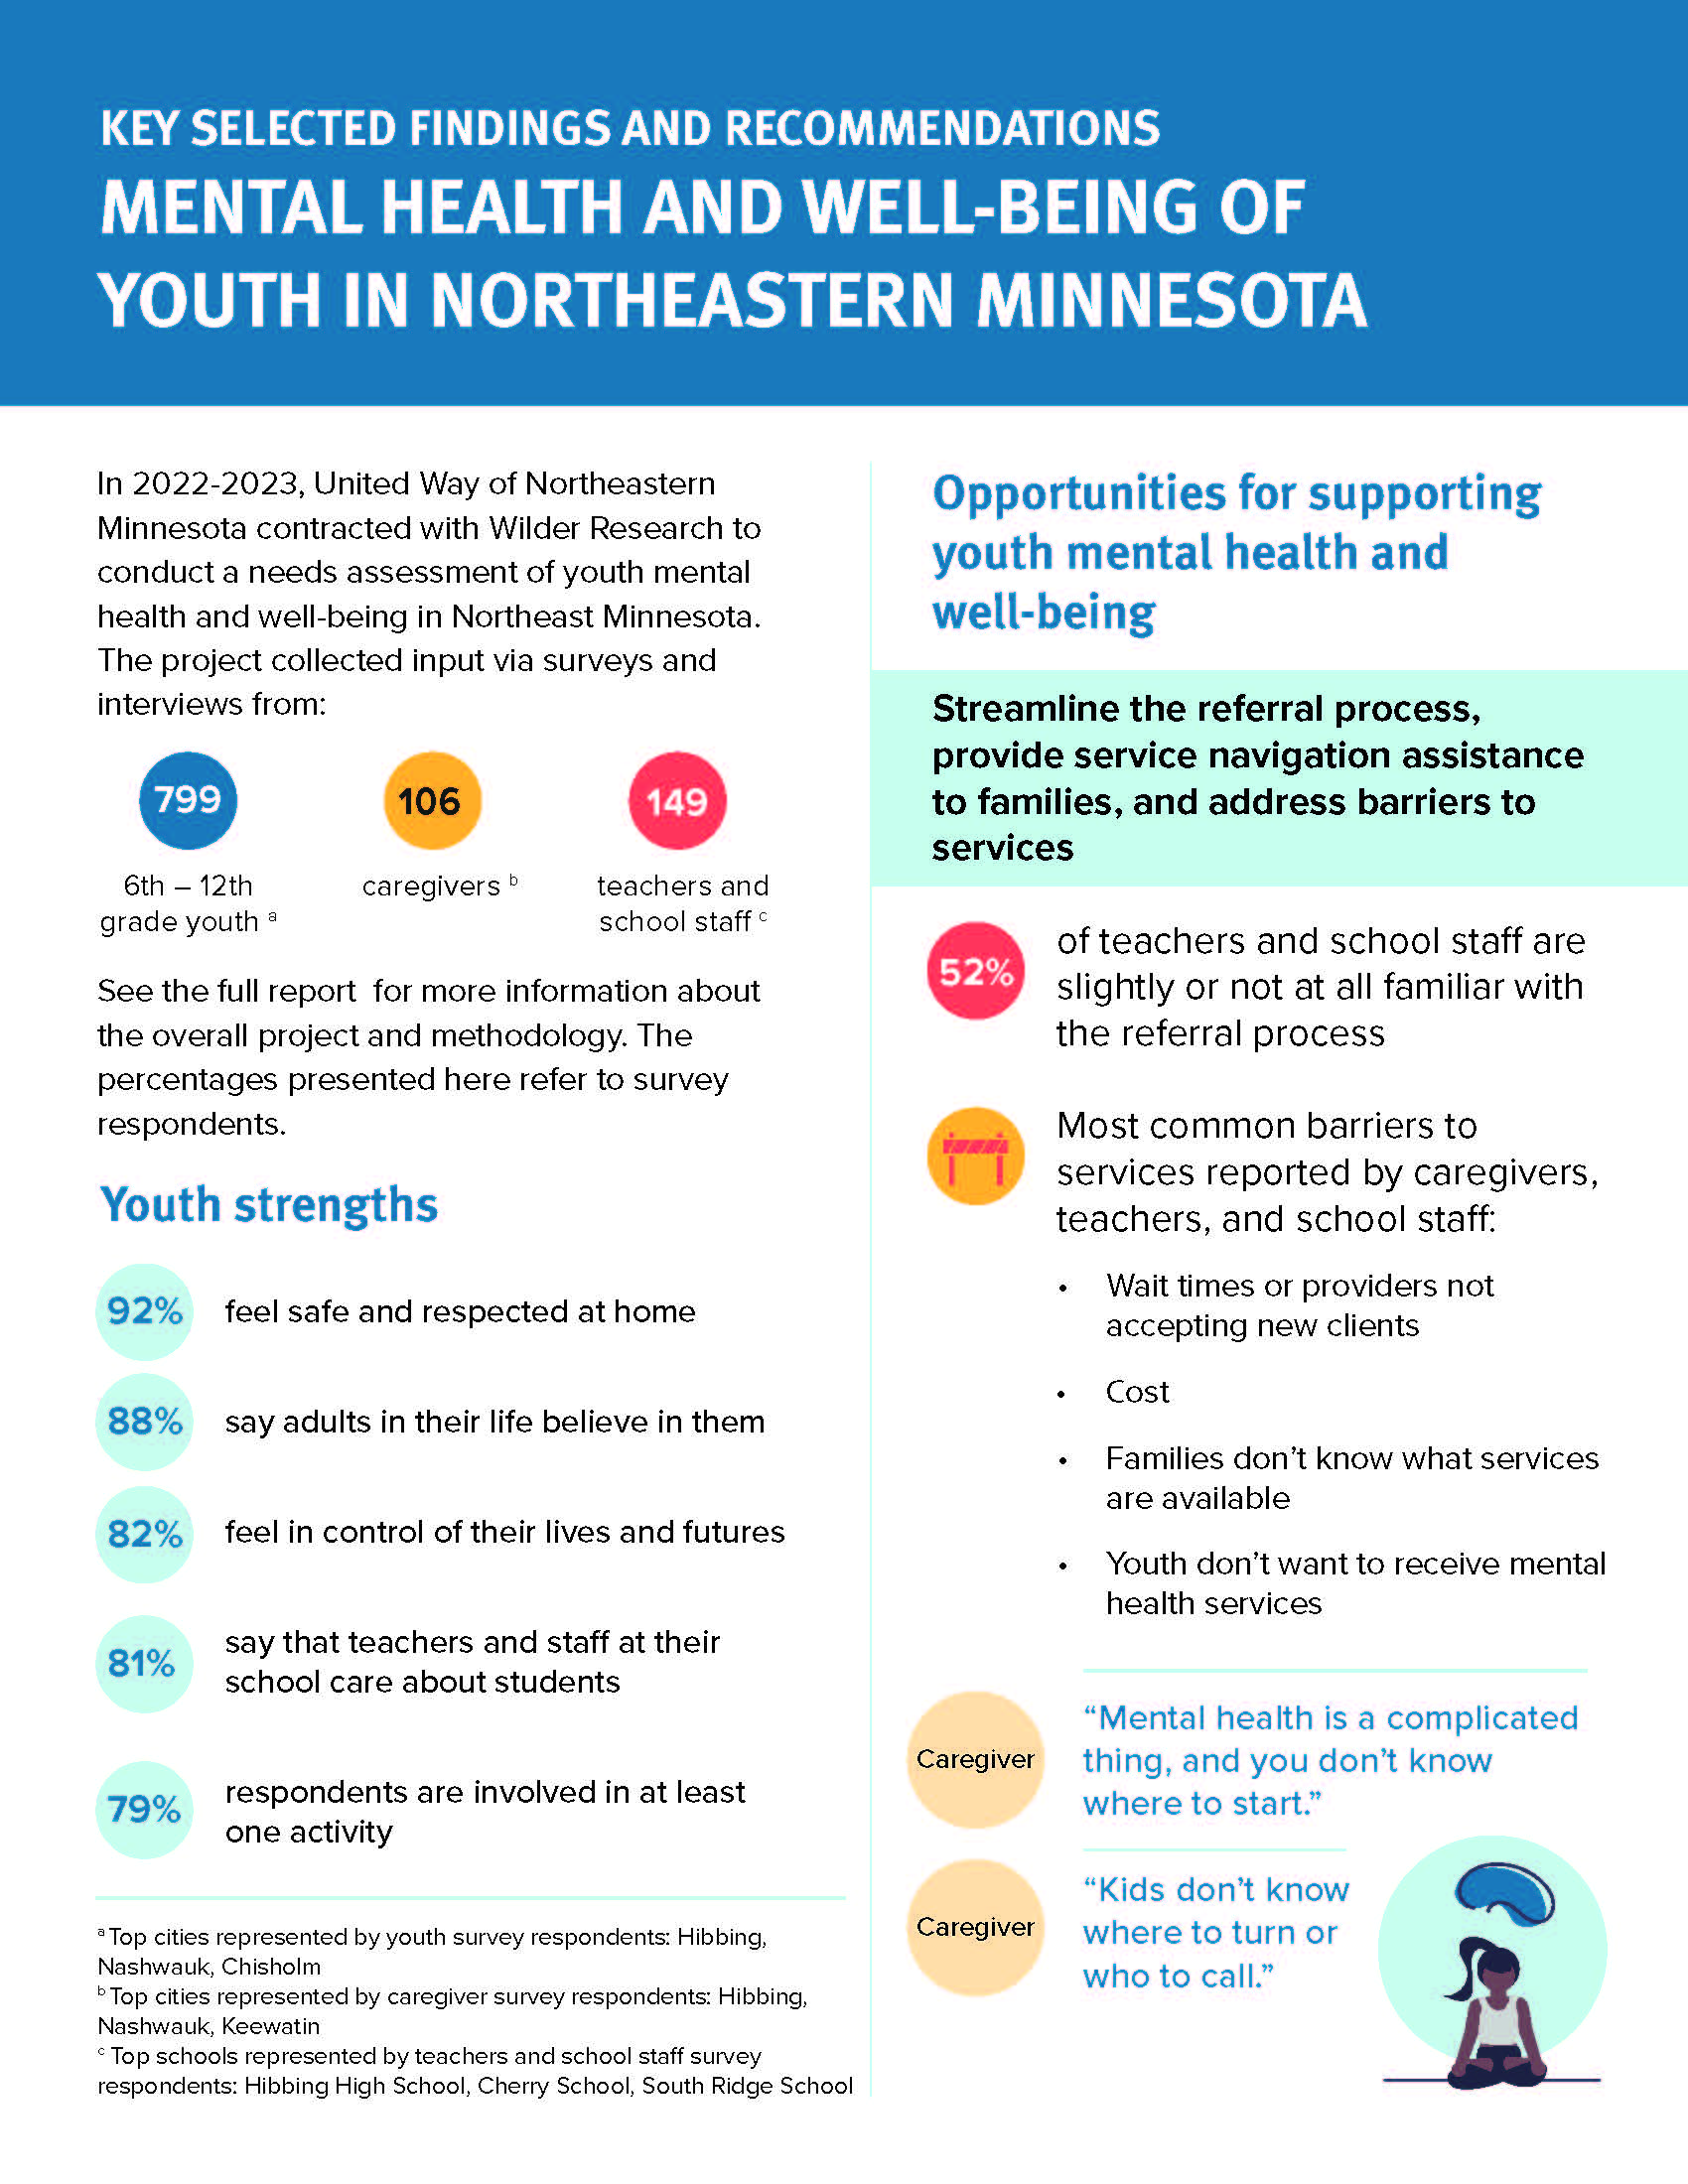 Summary of key findings from Wilder Research NE MN Youth Mental Health Needs Assessment